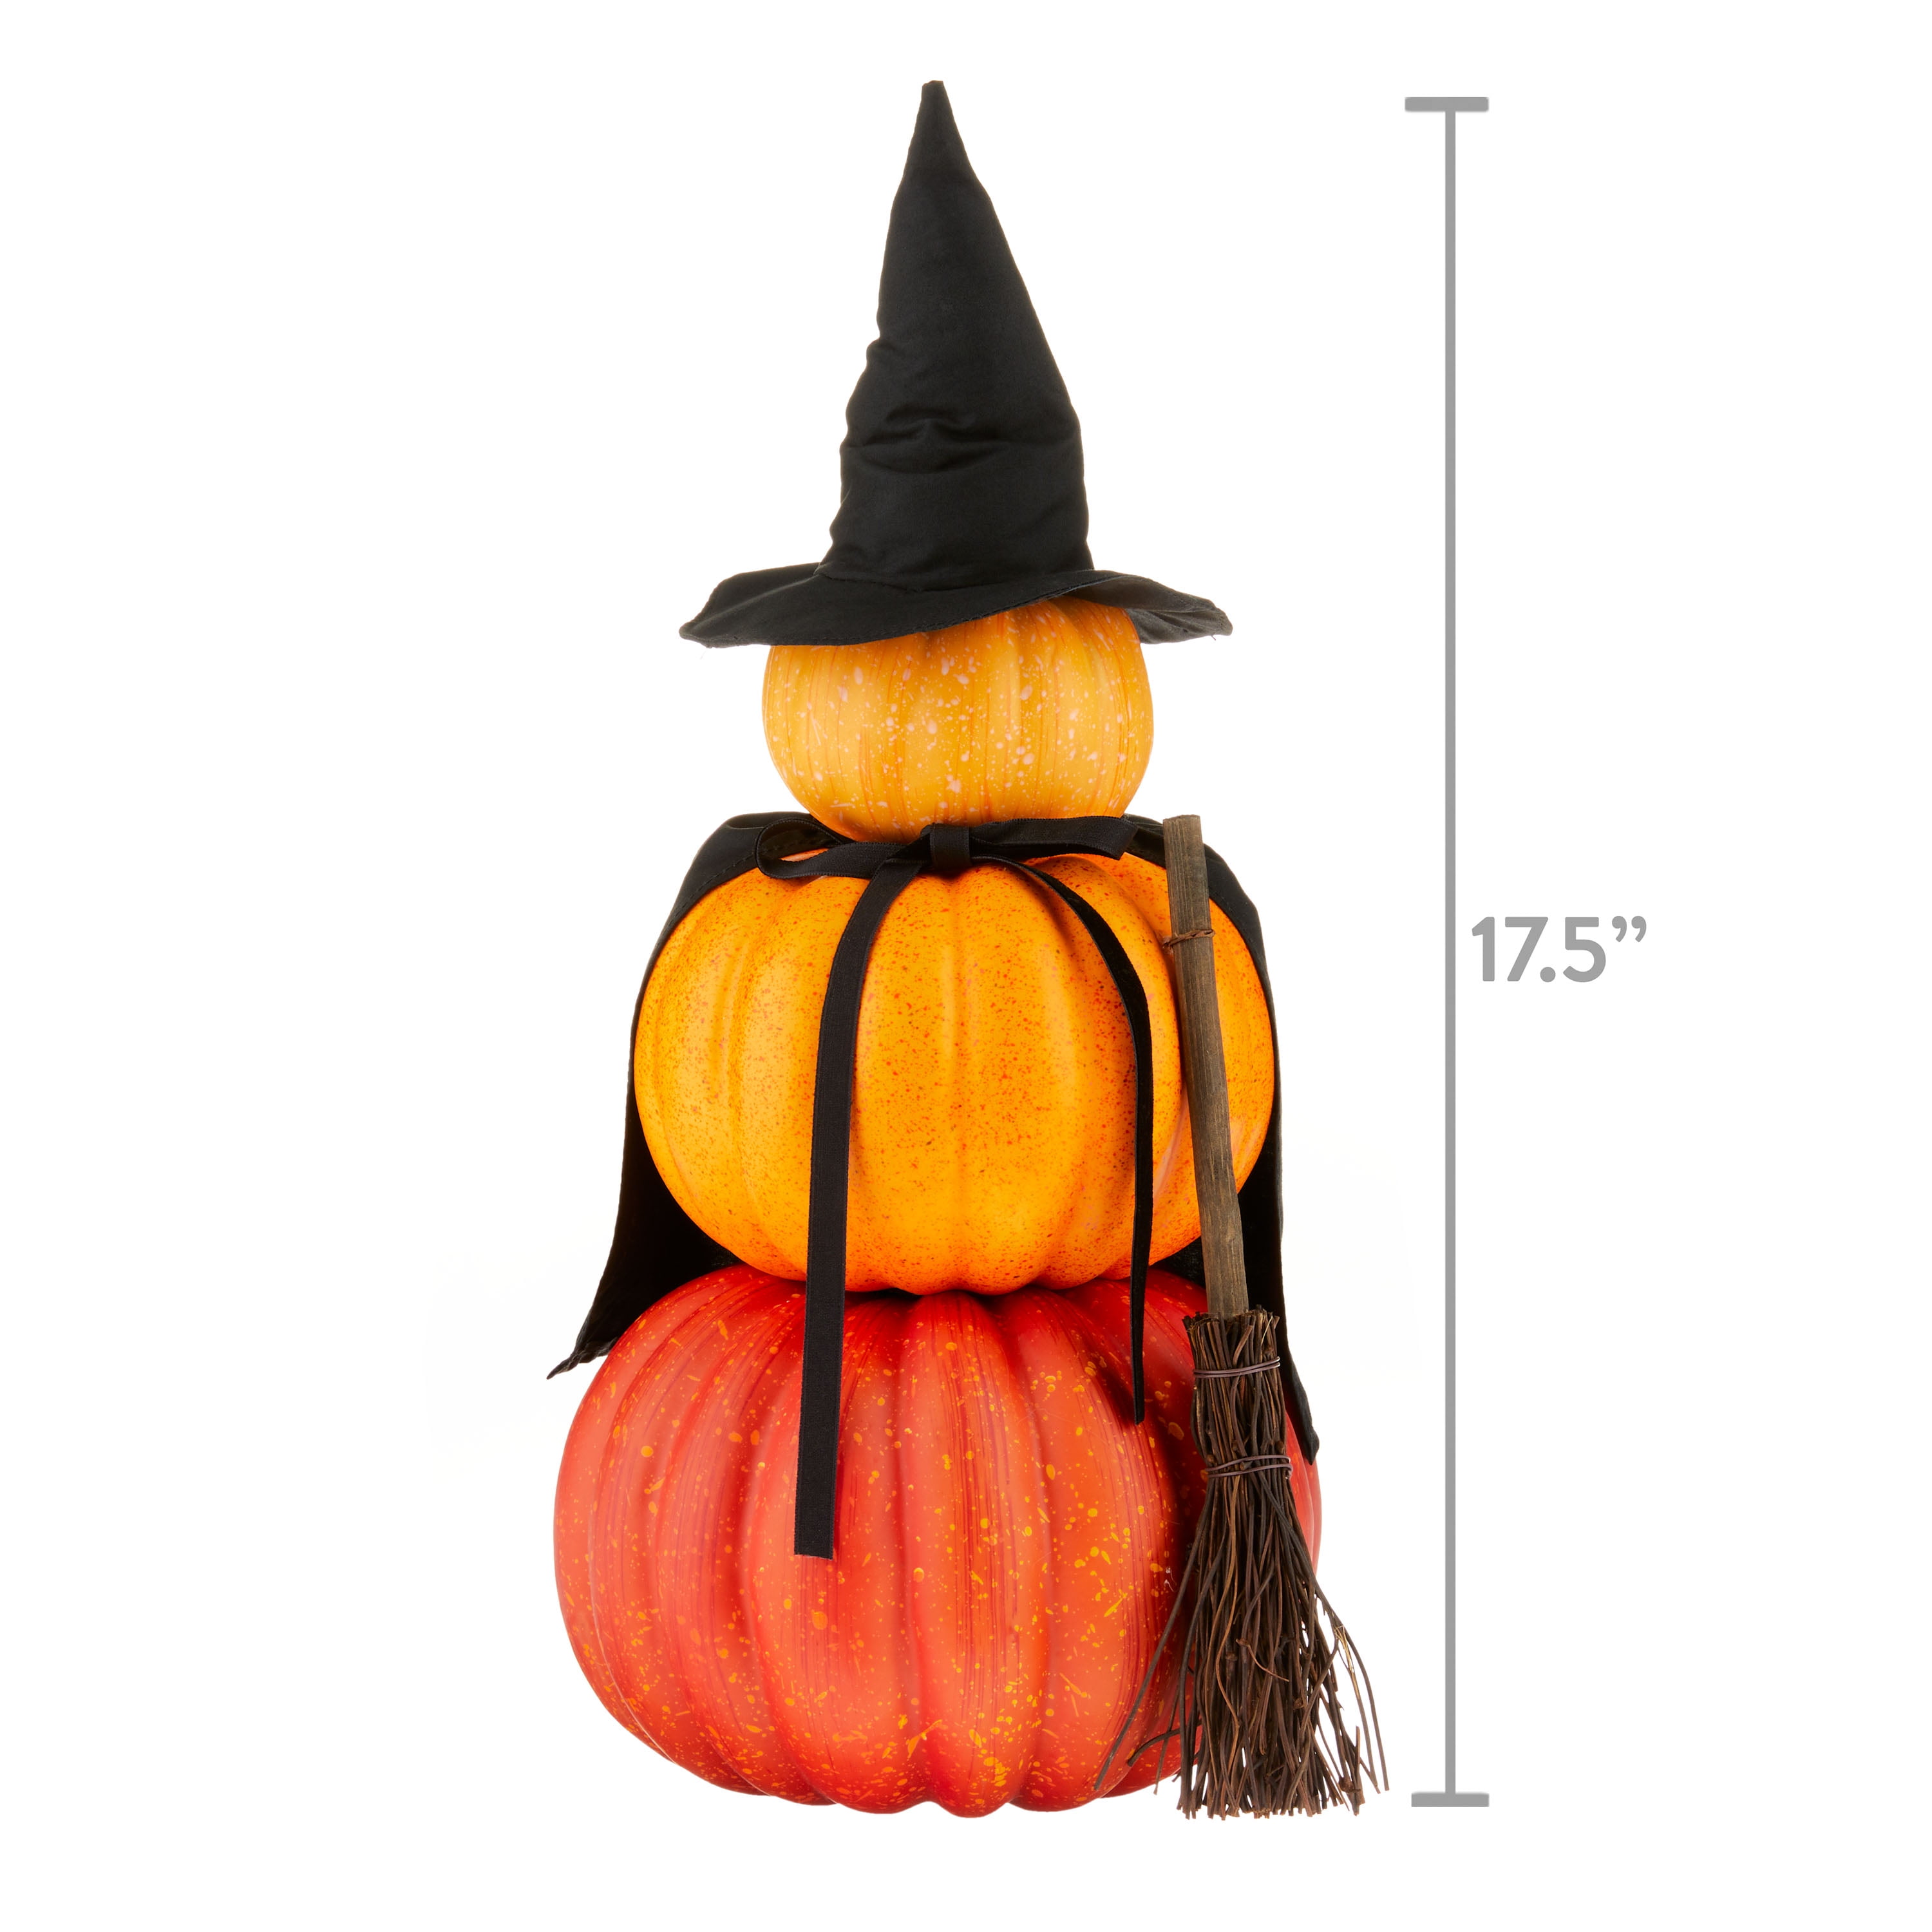 Witch's Pumpkin (Airdrop) - 🔥🔥 Check full Collection for other